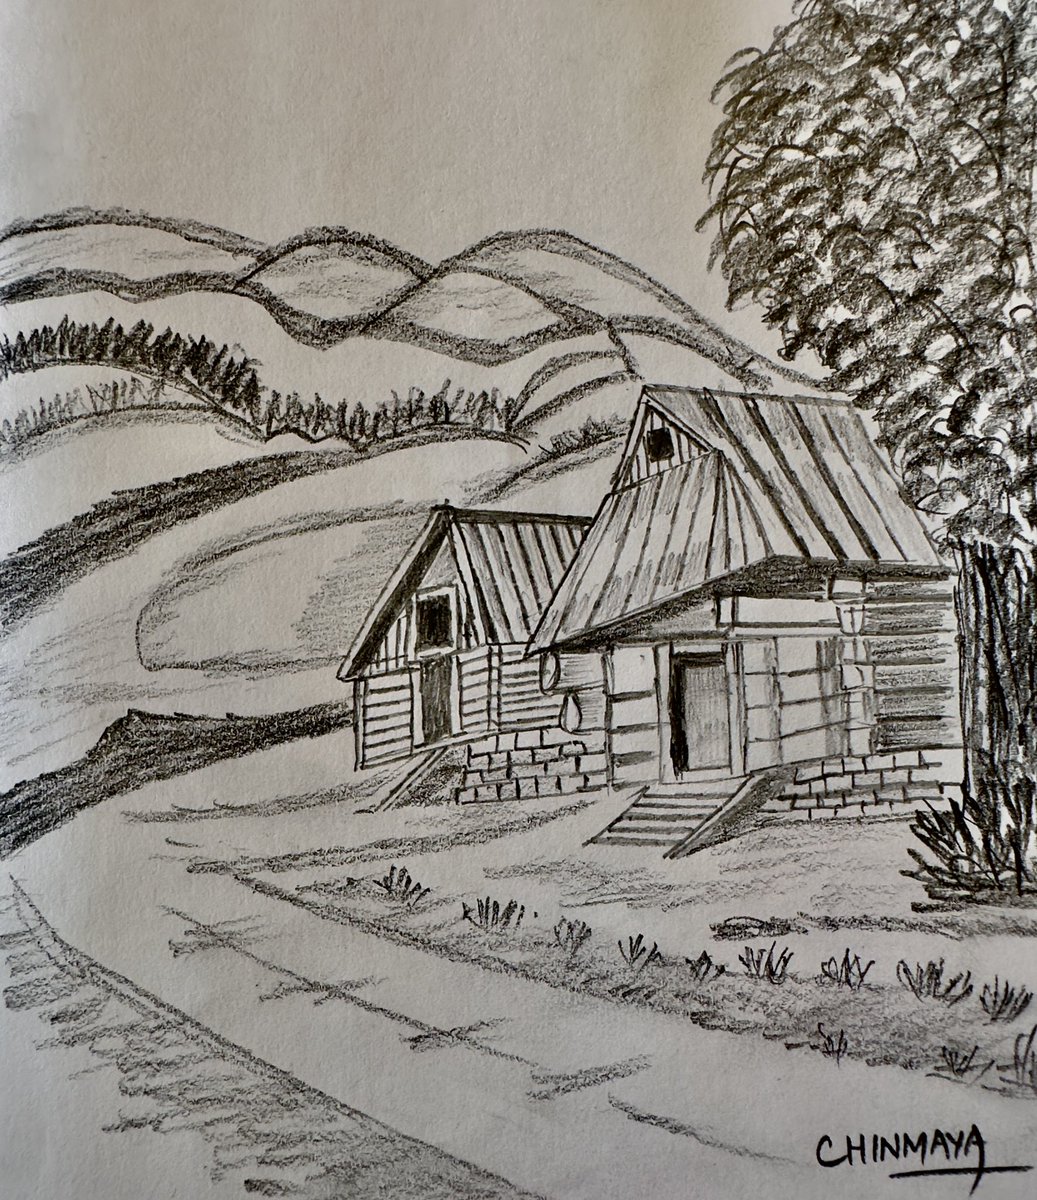 Drawing 29: 

In the quiet embrace of mountains, pencil lines trace the poetry of nature - trees whispering, wooden houses nestled, and a road winding through stories untold. 🏞️🏡✏️ #NatureSketch #MountainPoetry #PencilArt #WoodenHomes #ArtByChinmaya